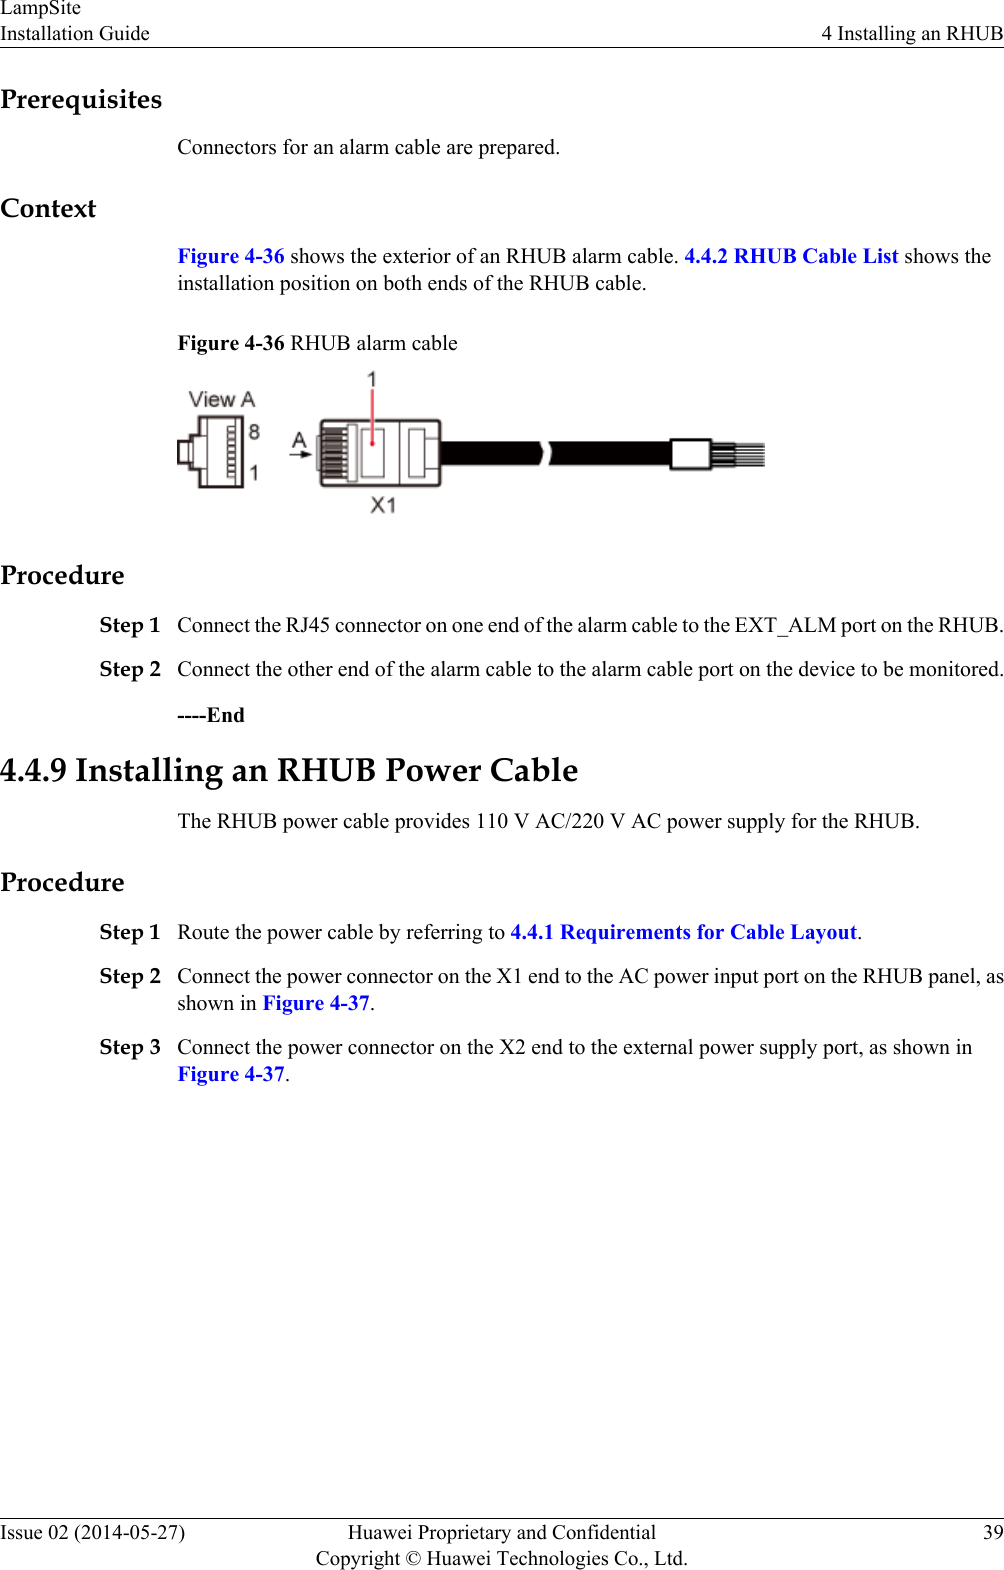 PrerequisitesConnectors for an alarm cable are prepared.ContextFigure 4-36 shows the exterior of an RHUB alarm cable. 4.4.2 RHUB Cable List shows theinstallation position on both ends of the RHUB cable.Figure 4-36 RHUB alarm cableProcedureStep 1 Connect the RJ45 connector on one end of the alarm cable to the EXT_ALM port on the RHUB.Step 2 Connect the other end of the alarm cable to the alarm cable port on the device to be monitored.----End4.4.9 Installing an RHUB Power CableThe RHUB power cable provides 110 V AC/220 V AC power supply for the RHUB.ProcedureStep 1 Route the power cable by referring to 4.4.1 Requirements for Cable Layout.Step 2 Connect the power connector on the X1 end to the AC power input port on the RHUB panel, asshown in Figure 4-37.Step 3 Connect the power connector on the X2 end to the external power supply port, as shown inFigure 4-37.LampSiteInstallation Guide 4 Installing an RHUBIssue 02 (2014-05-27) Huawei Proprietary and ConfidentialCopyright © Huawei Technologies Co., Ltd.39